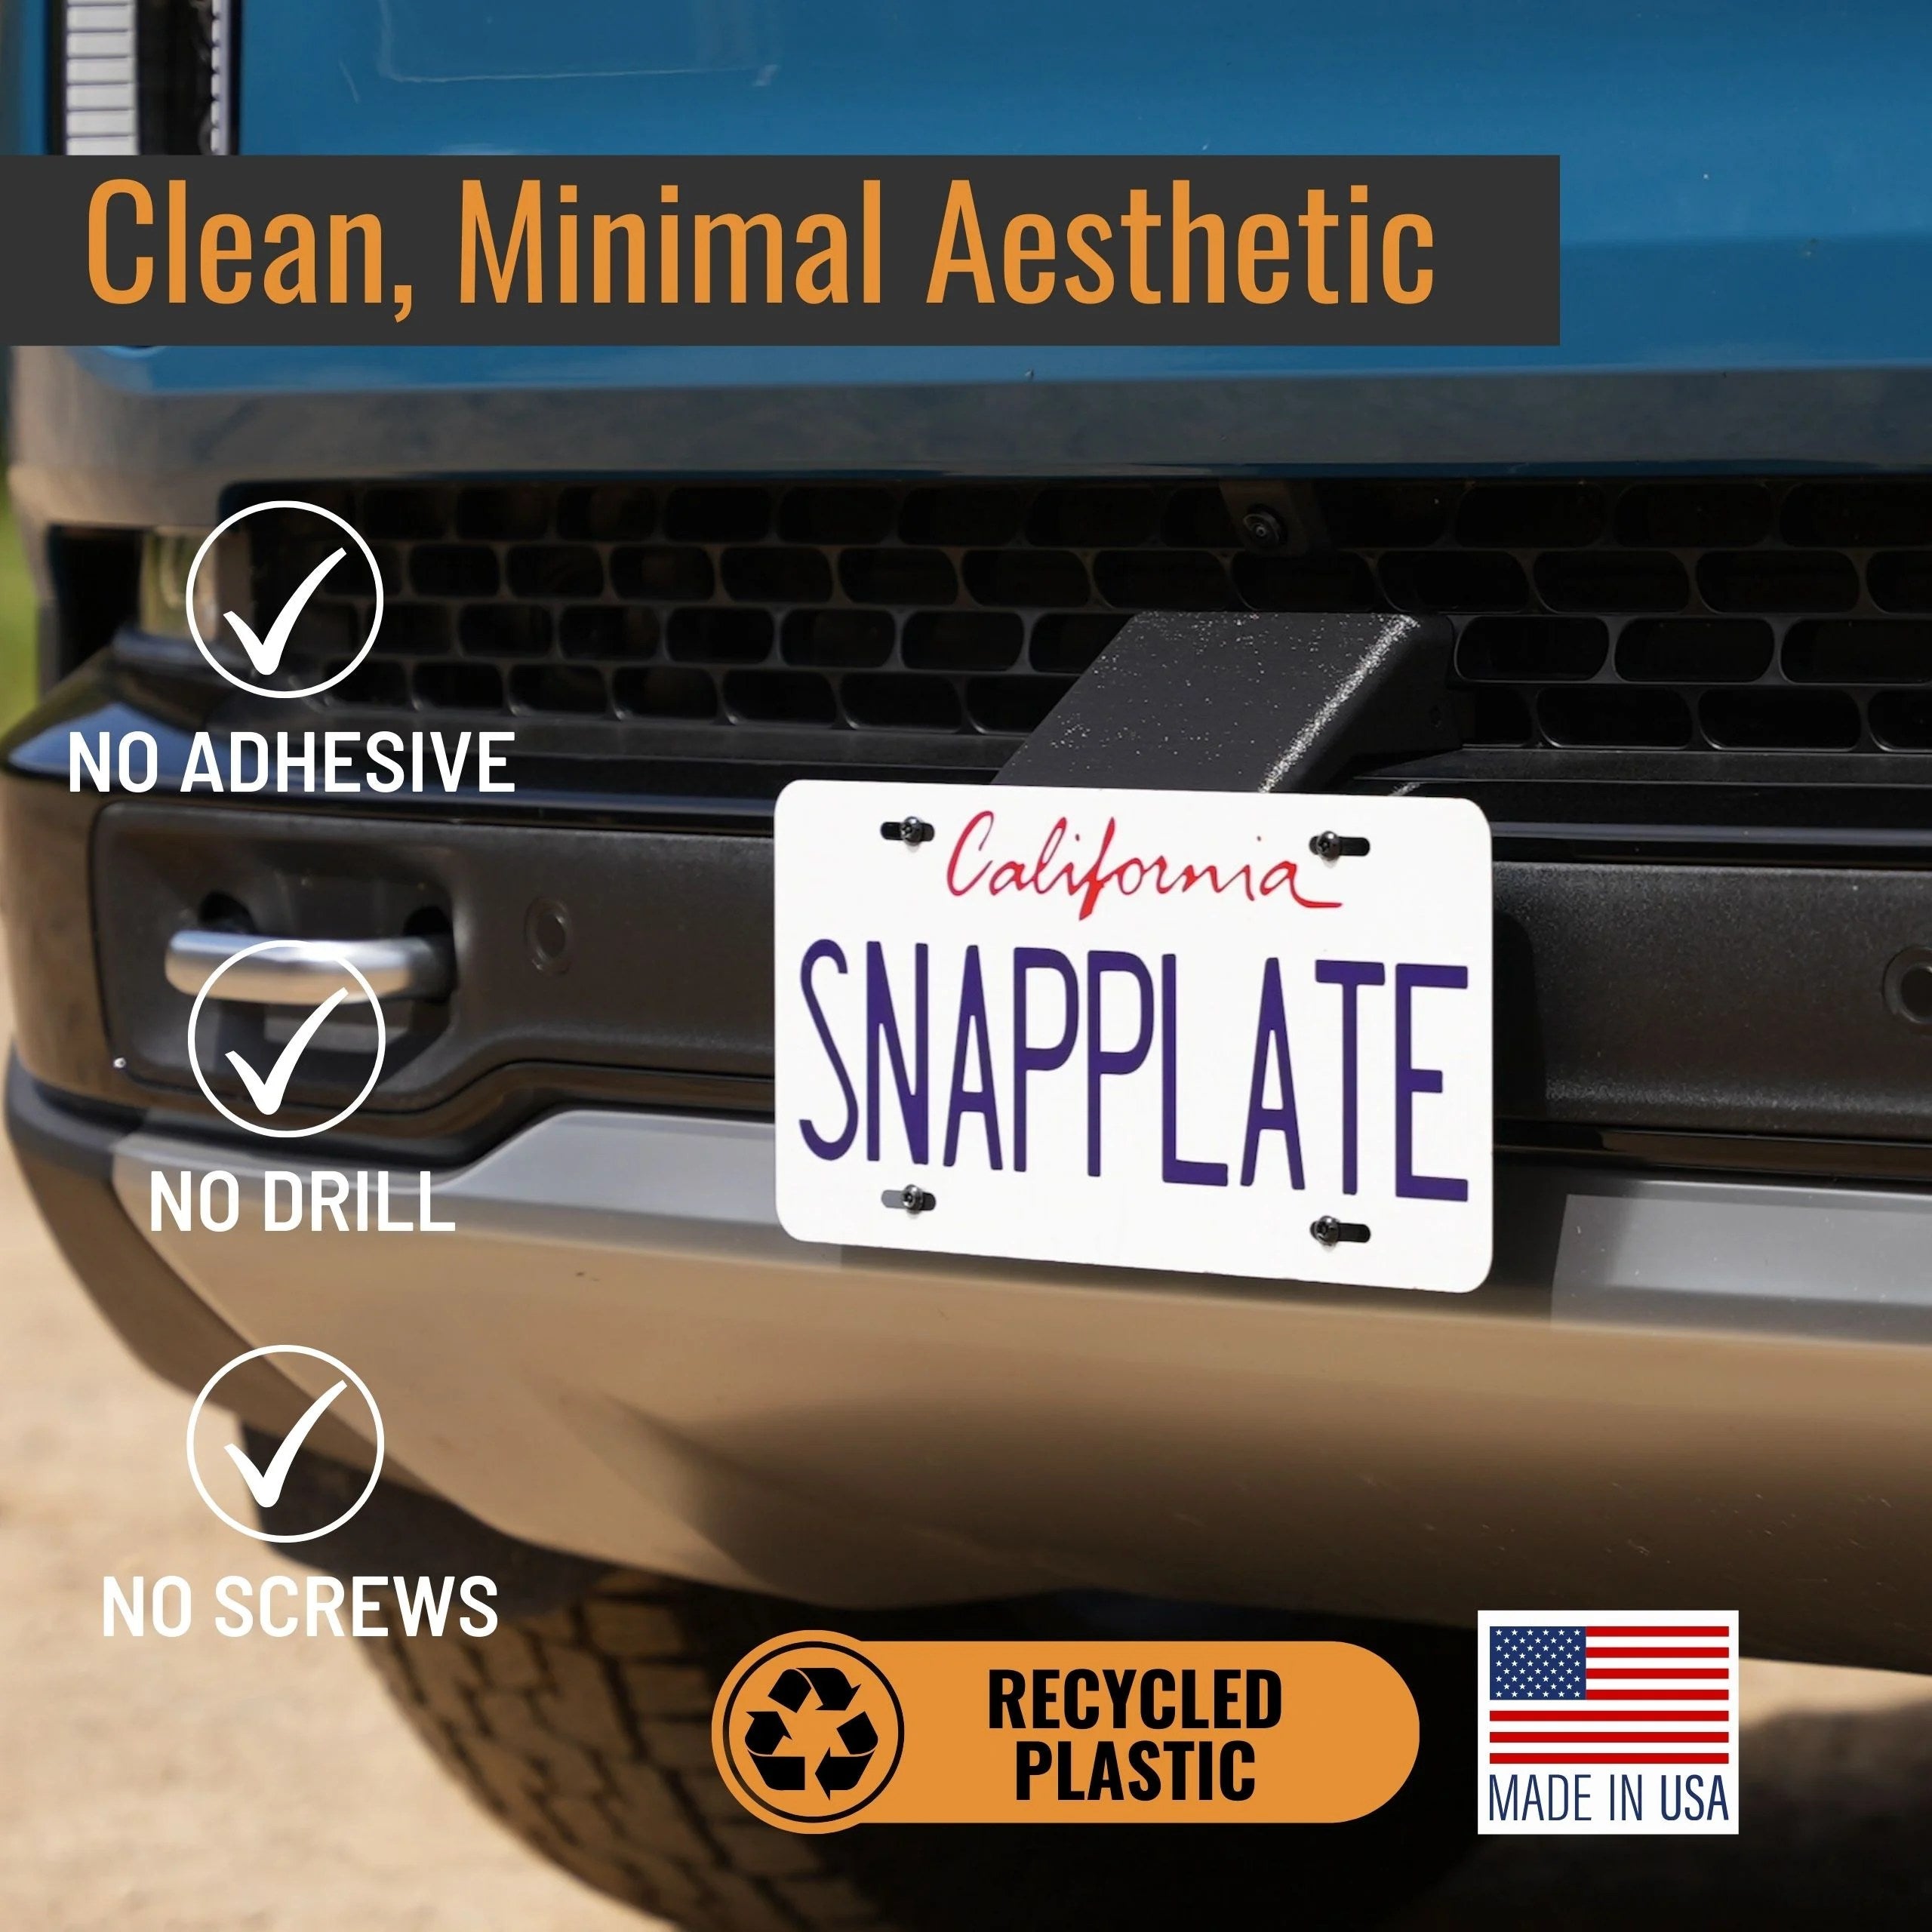 SnapPlate for Rivian R1T & R1S